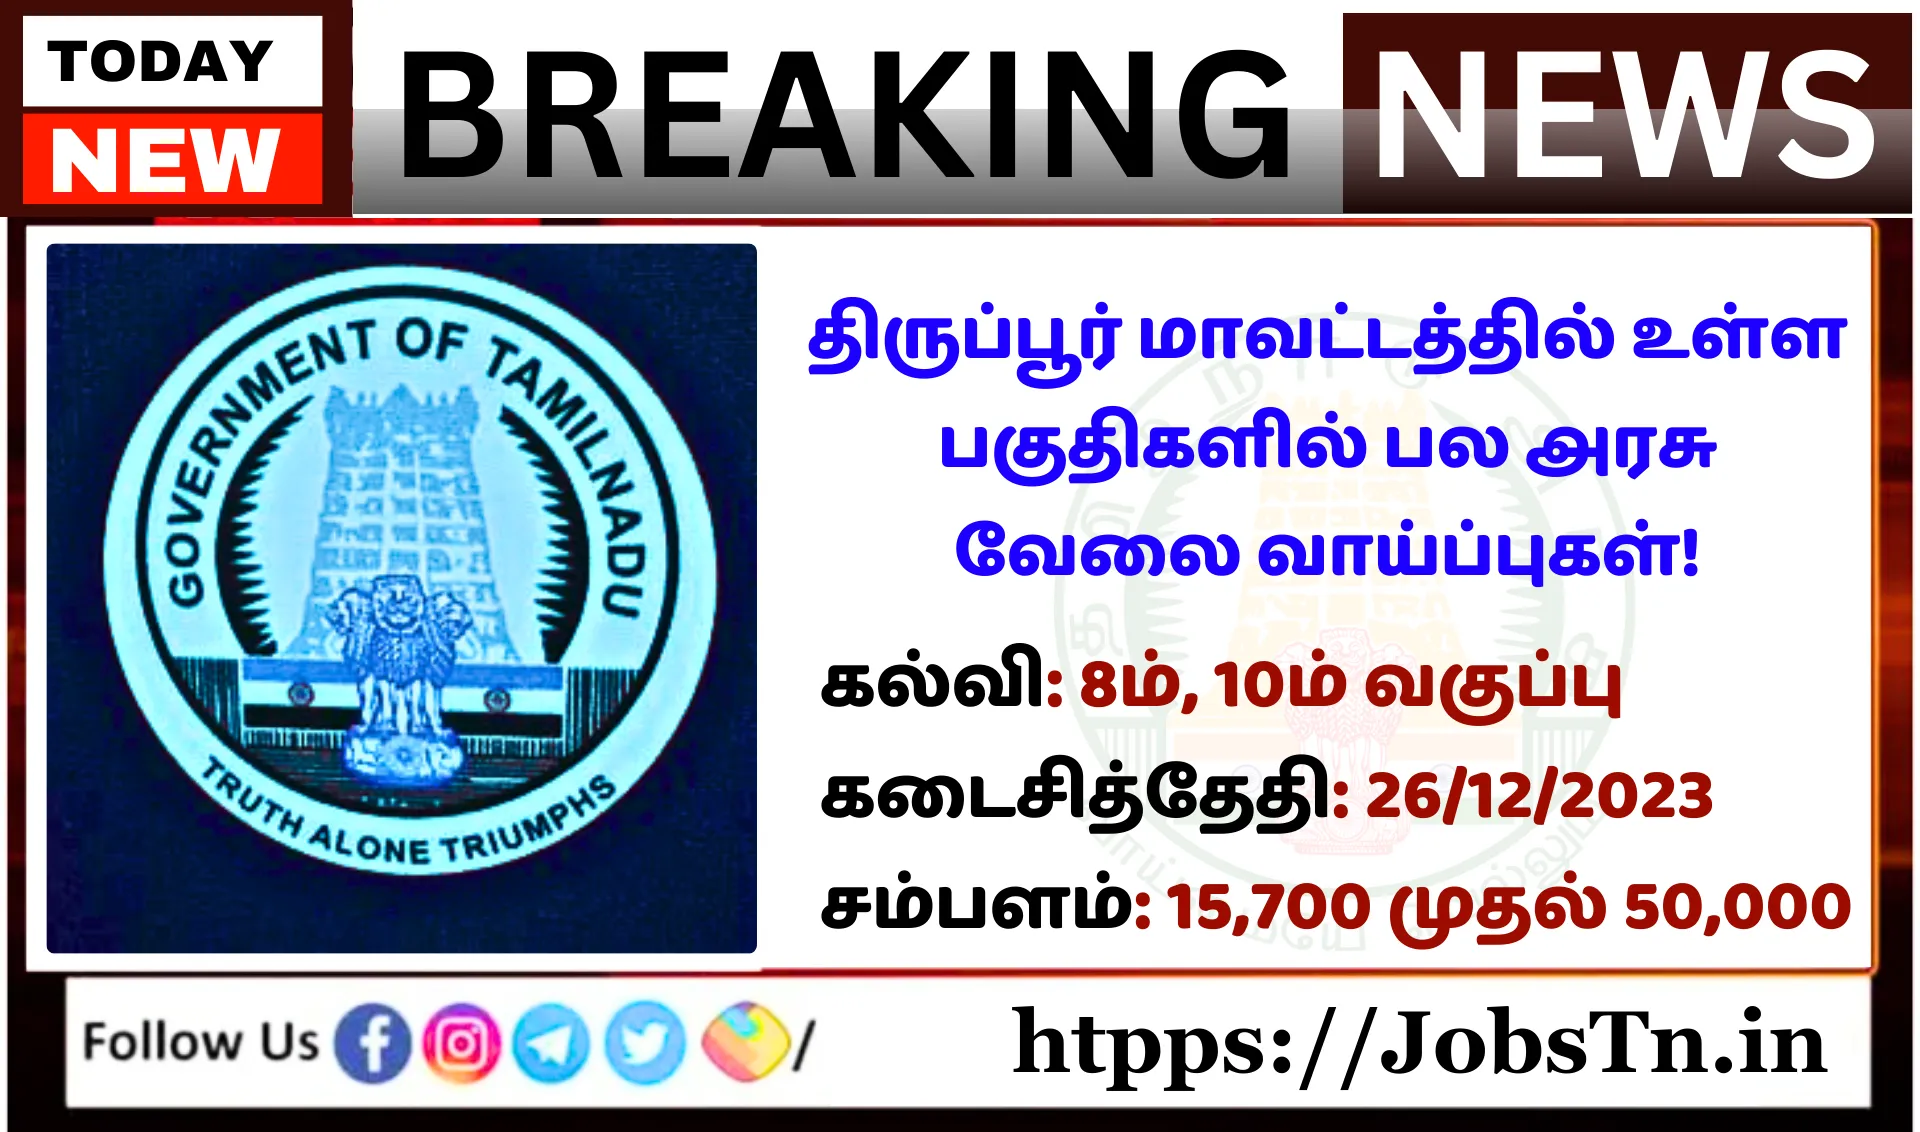 Many government job opportunities in Tirupur district!